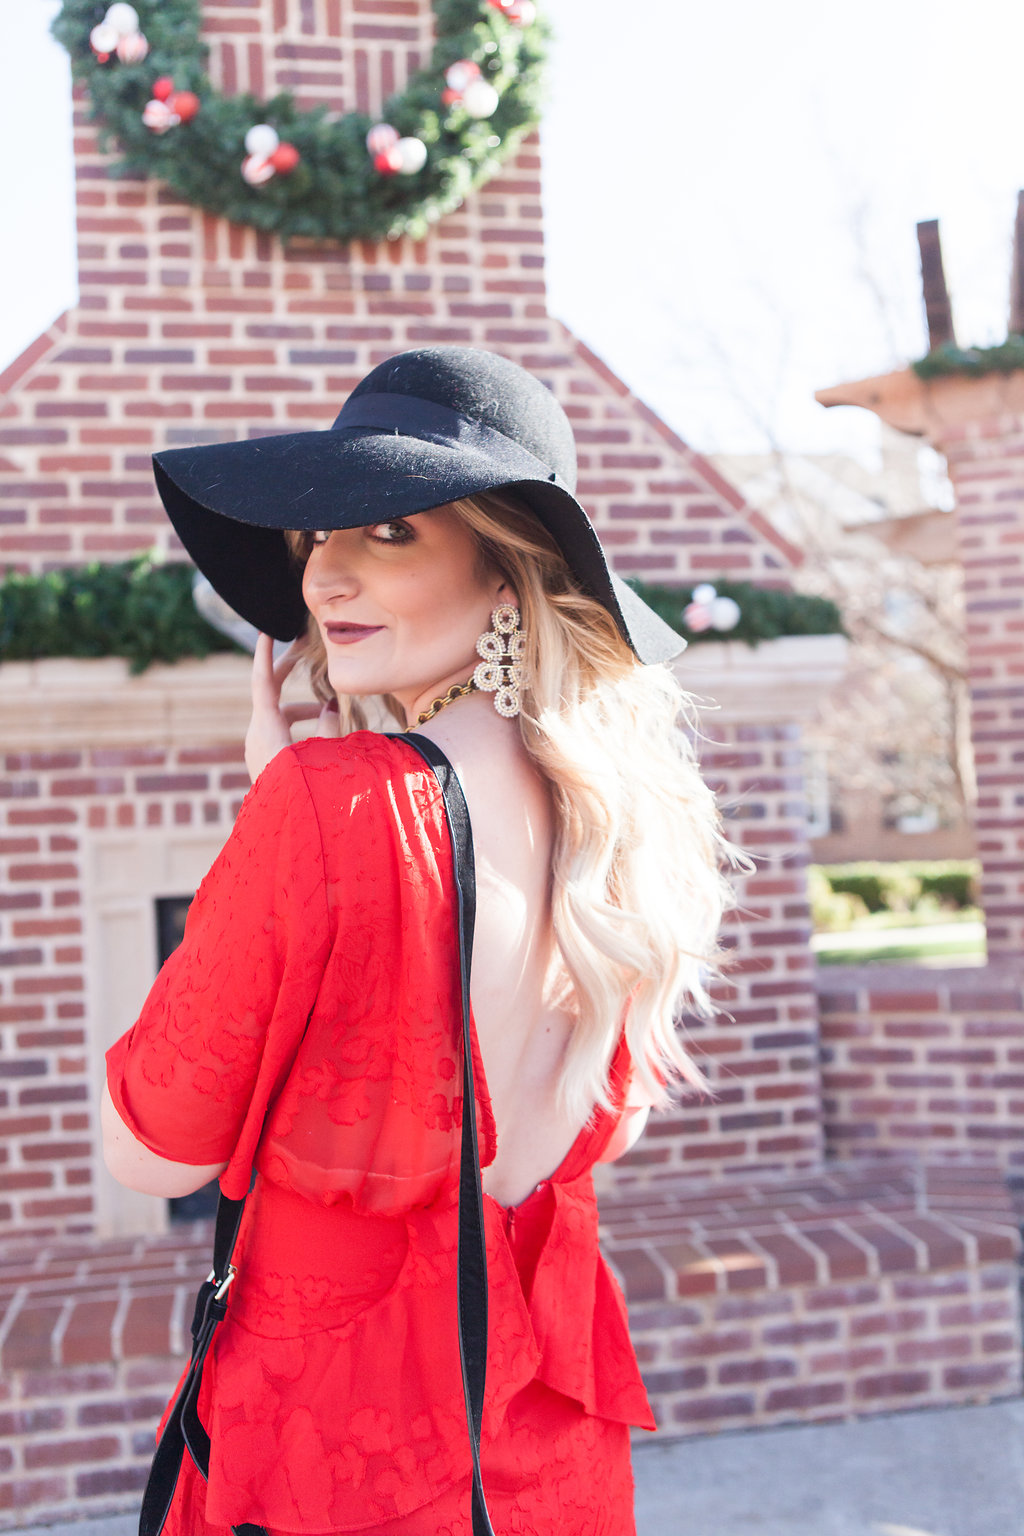 Holiday Inspired Look | Red Dress | Audrey Madison Stowe a fashion and lifestyle blog - 5 Holiday Looks To Get Inspired by Texas fashion blogger Audrey Madison Stowe